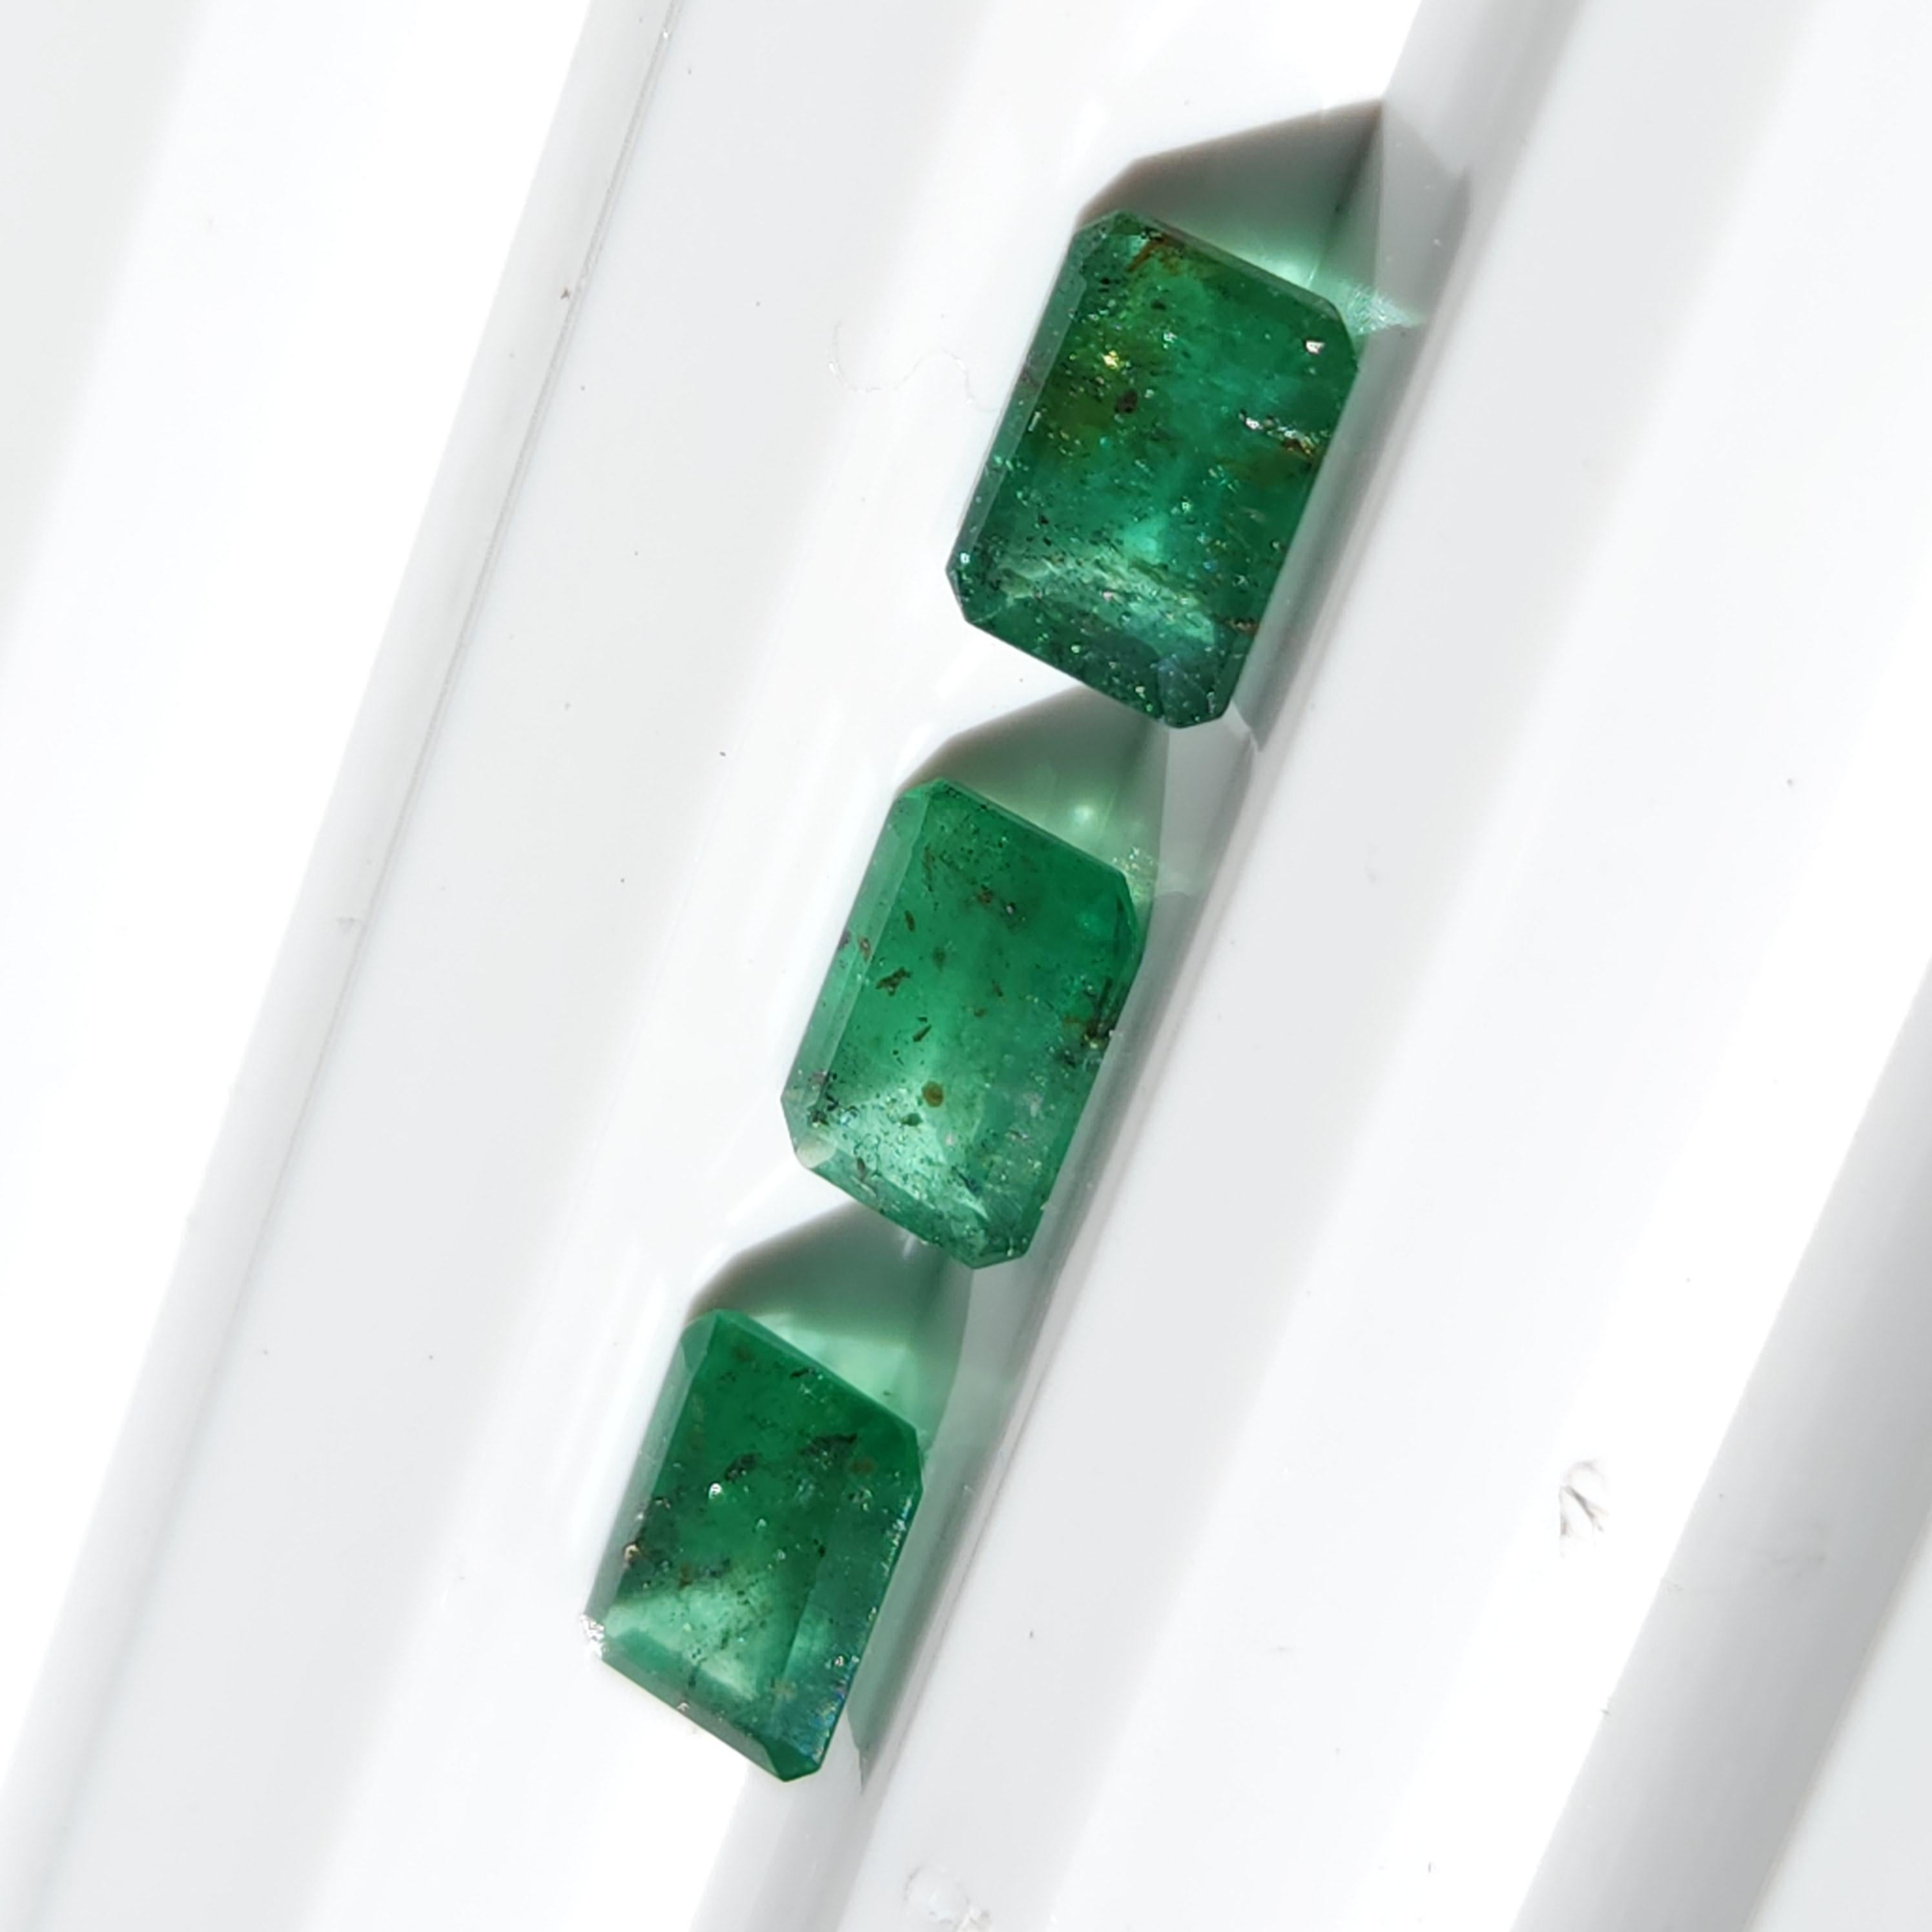 Exquisite 1.82ct Loose Radiant Shape Emerald Gemstone

Product Description:

Discover the allure of refined elegance with our 1.82ct loose Radiant Shape Emerald gemstone. With its mesmerizing green depth and uniquely faceted cut, this gemstone